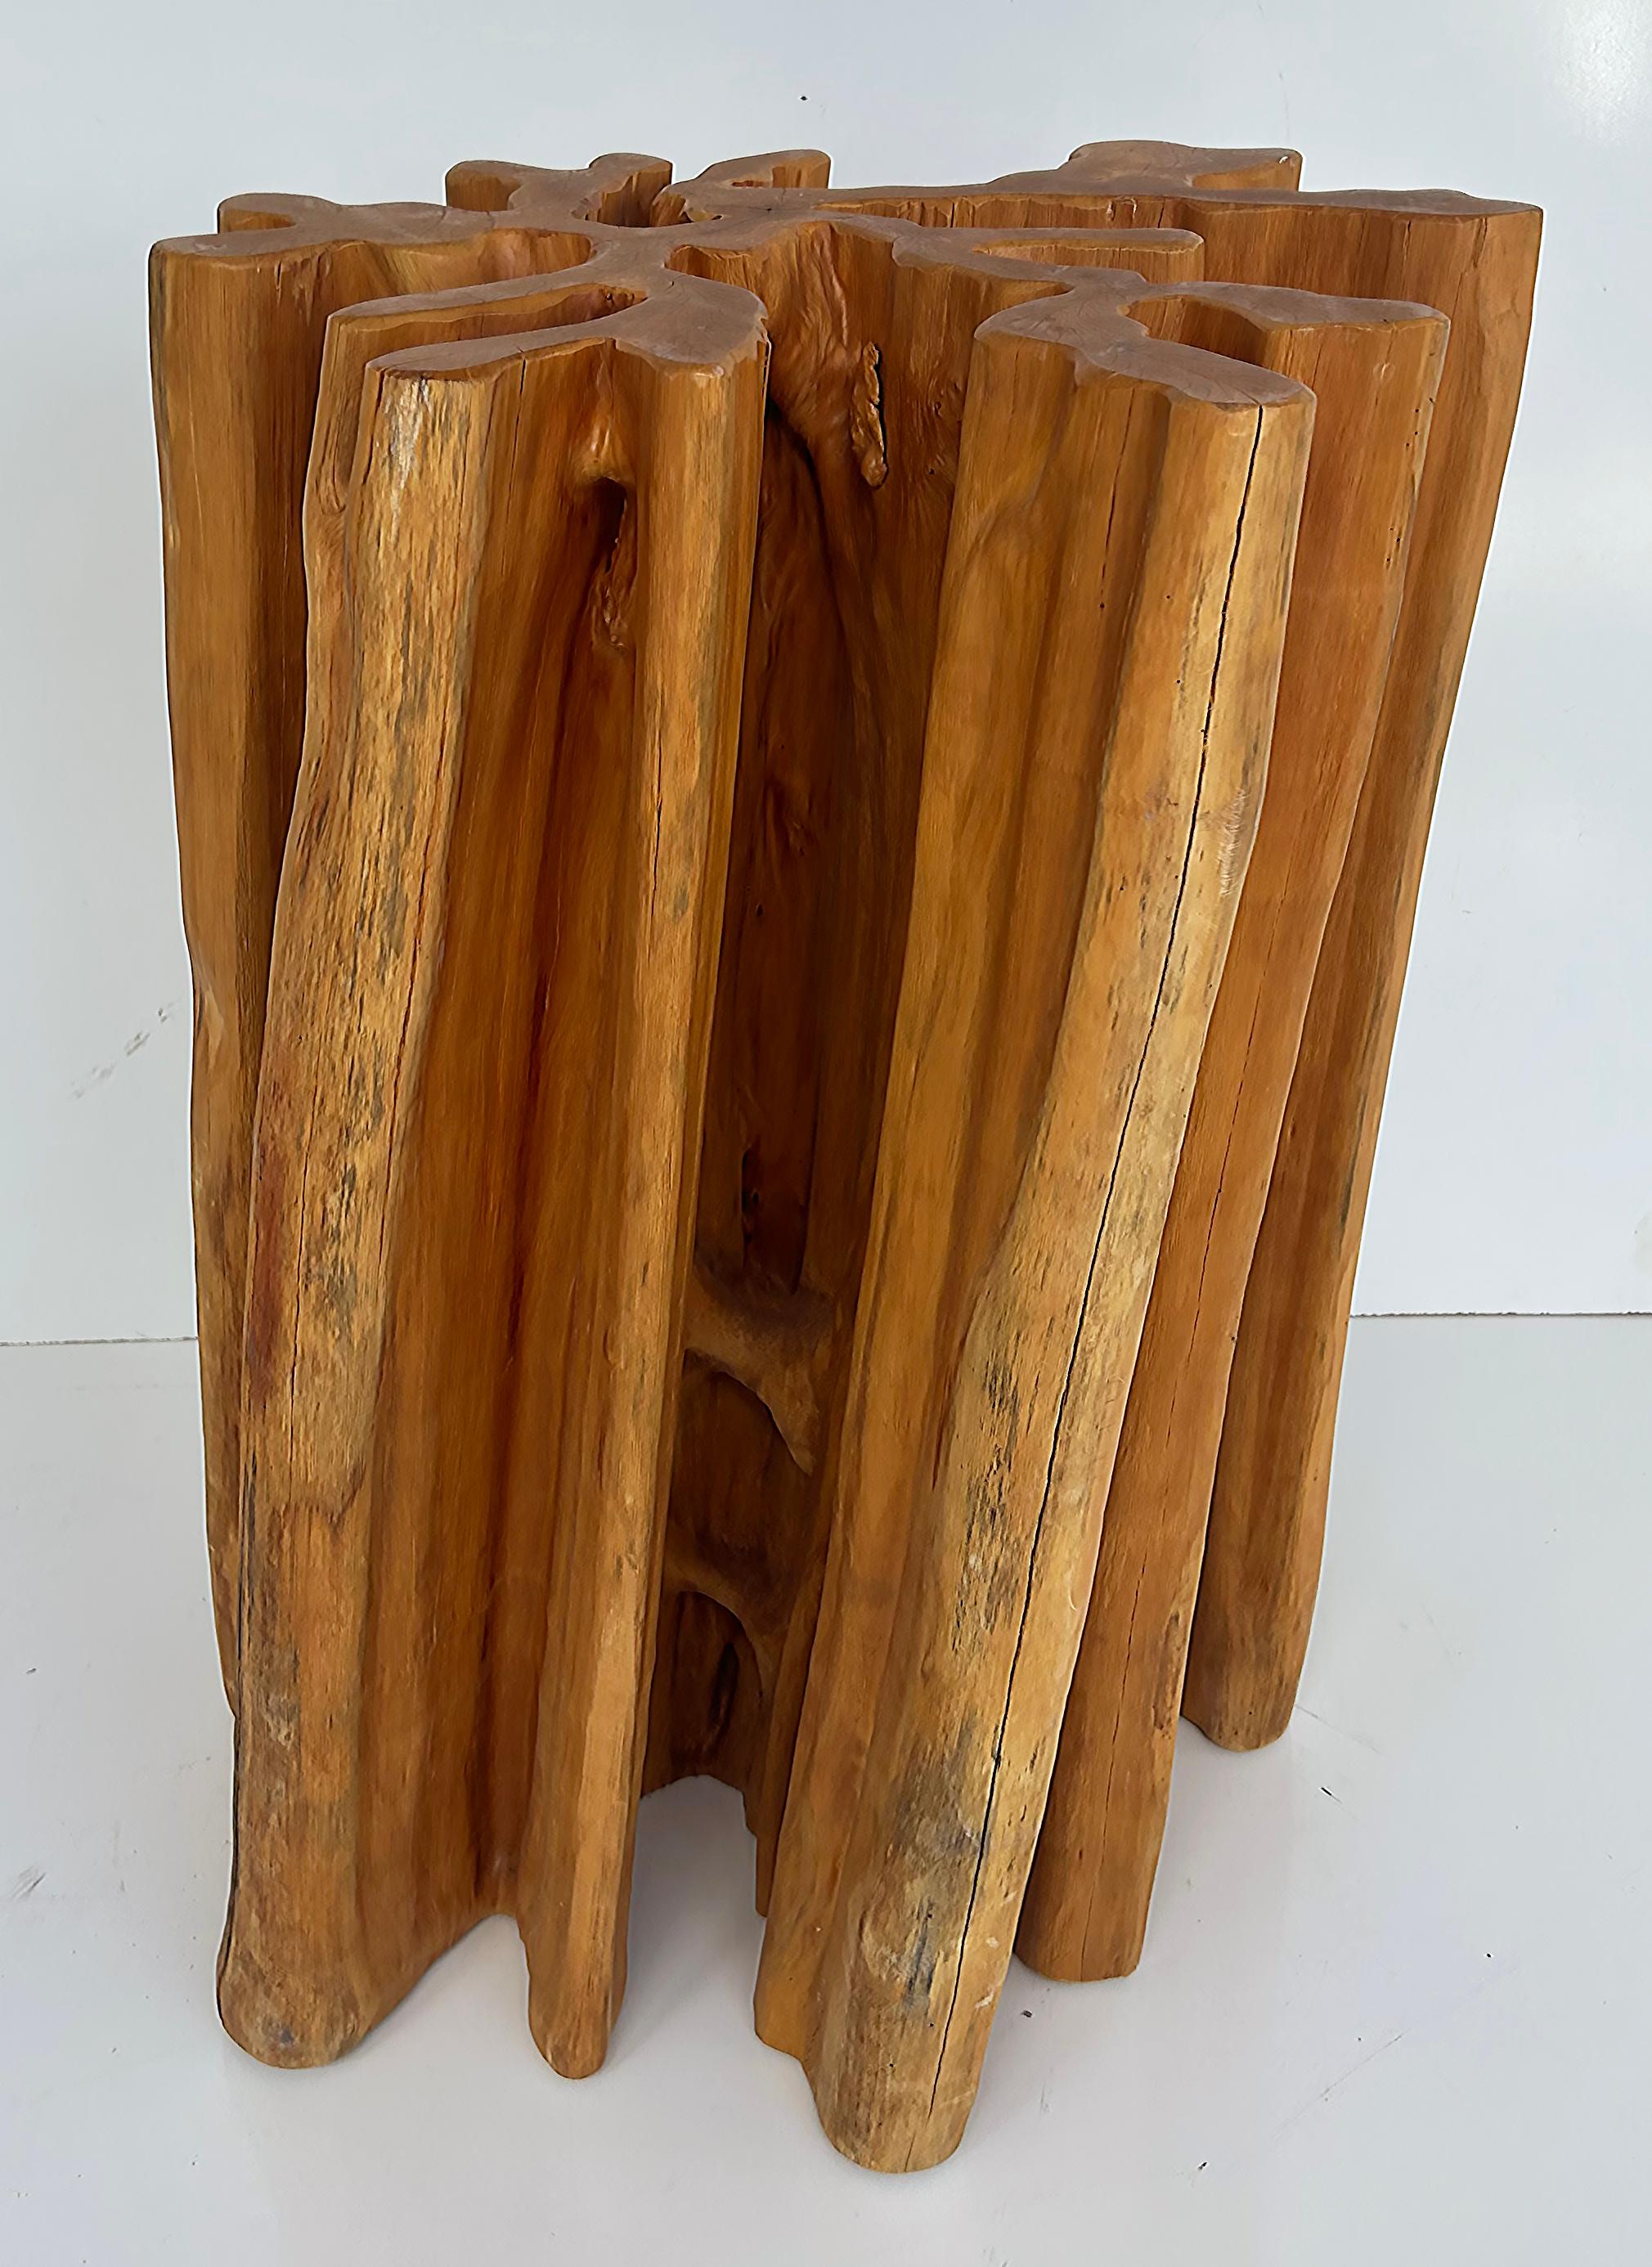 Organic Modern Brazilian Amazonia Guaranta Dining Table Base, Reclaimed Wood

Offered for sale is an organic modern reclaimed Guaranta Brazilian Amazonia wood table base. The base is naturally irregular with interesting textures and natural folds. 